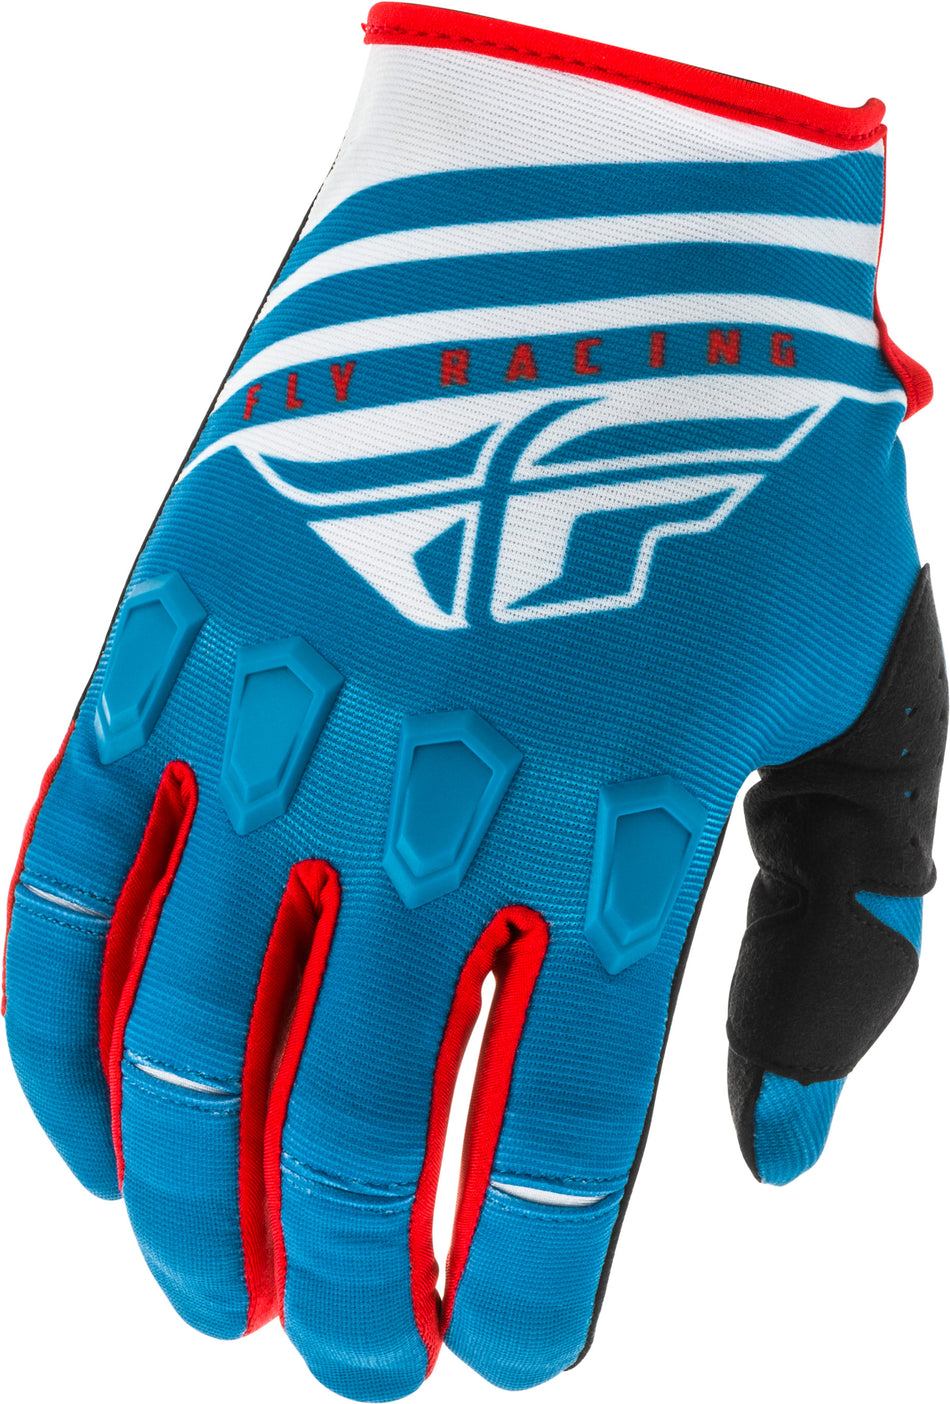 FLY RACING Kinetic K220 Gloves Blue/White/Red Sz 08 373-51108